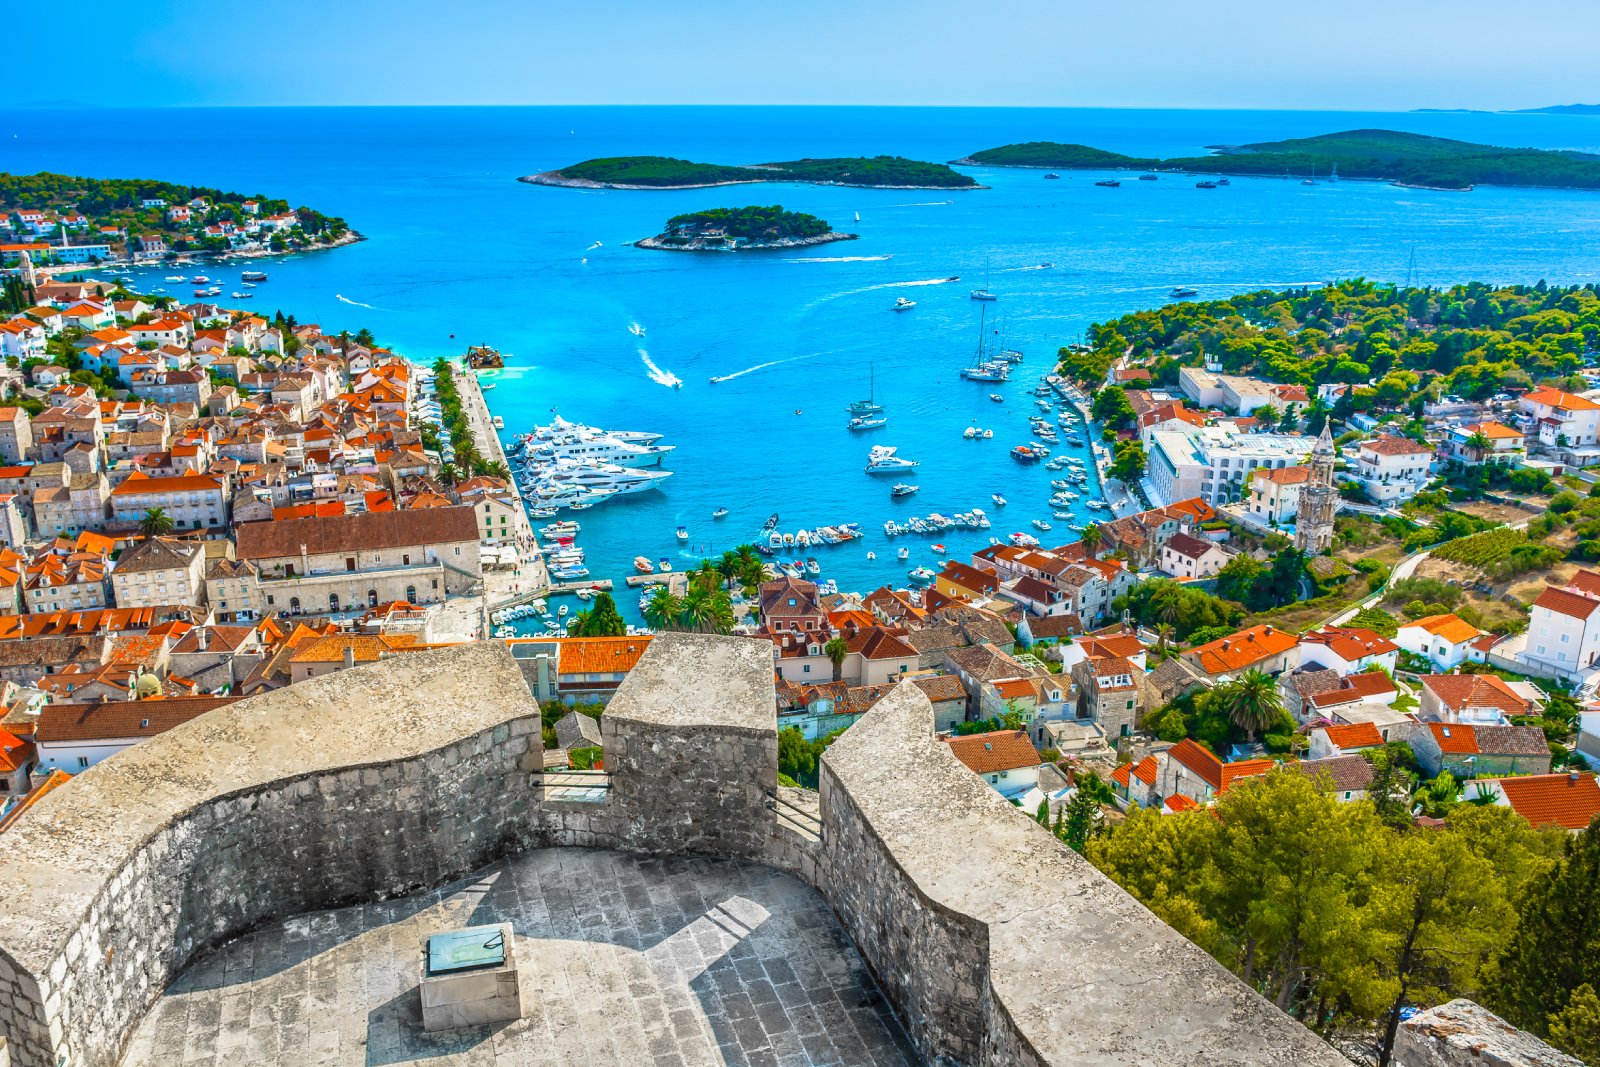 <p><span>Croatia was one of the earliest adopters of the Digital Nomad Visa which established the process for foreigners in 2021. Close family members, such as spouses, children, and common-law marriage partners can also join workers in Croatia for the duration of their stay.</span></p><p><b>Cost of application:</b><span> 55 EUR</span></p><p><b>Income requirement:</b><span> 2540 EUR per month </span></p><p><b>Visa duration: </b><span>12 months</span> </p>